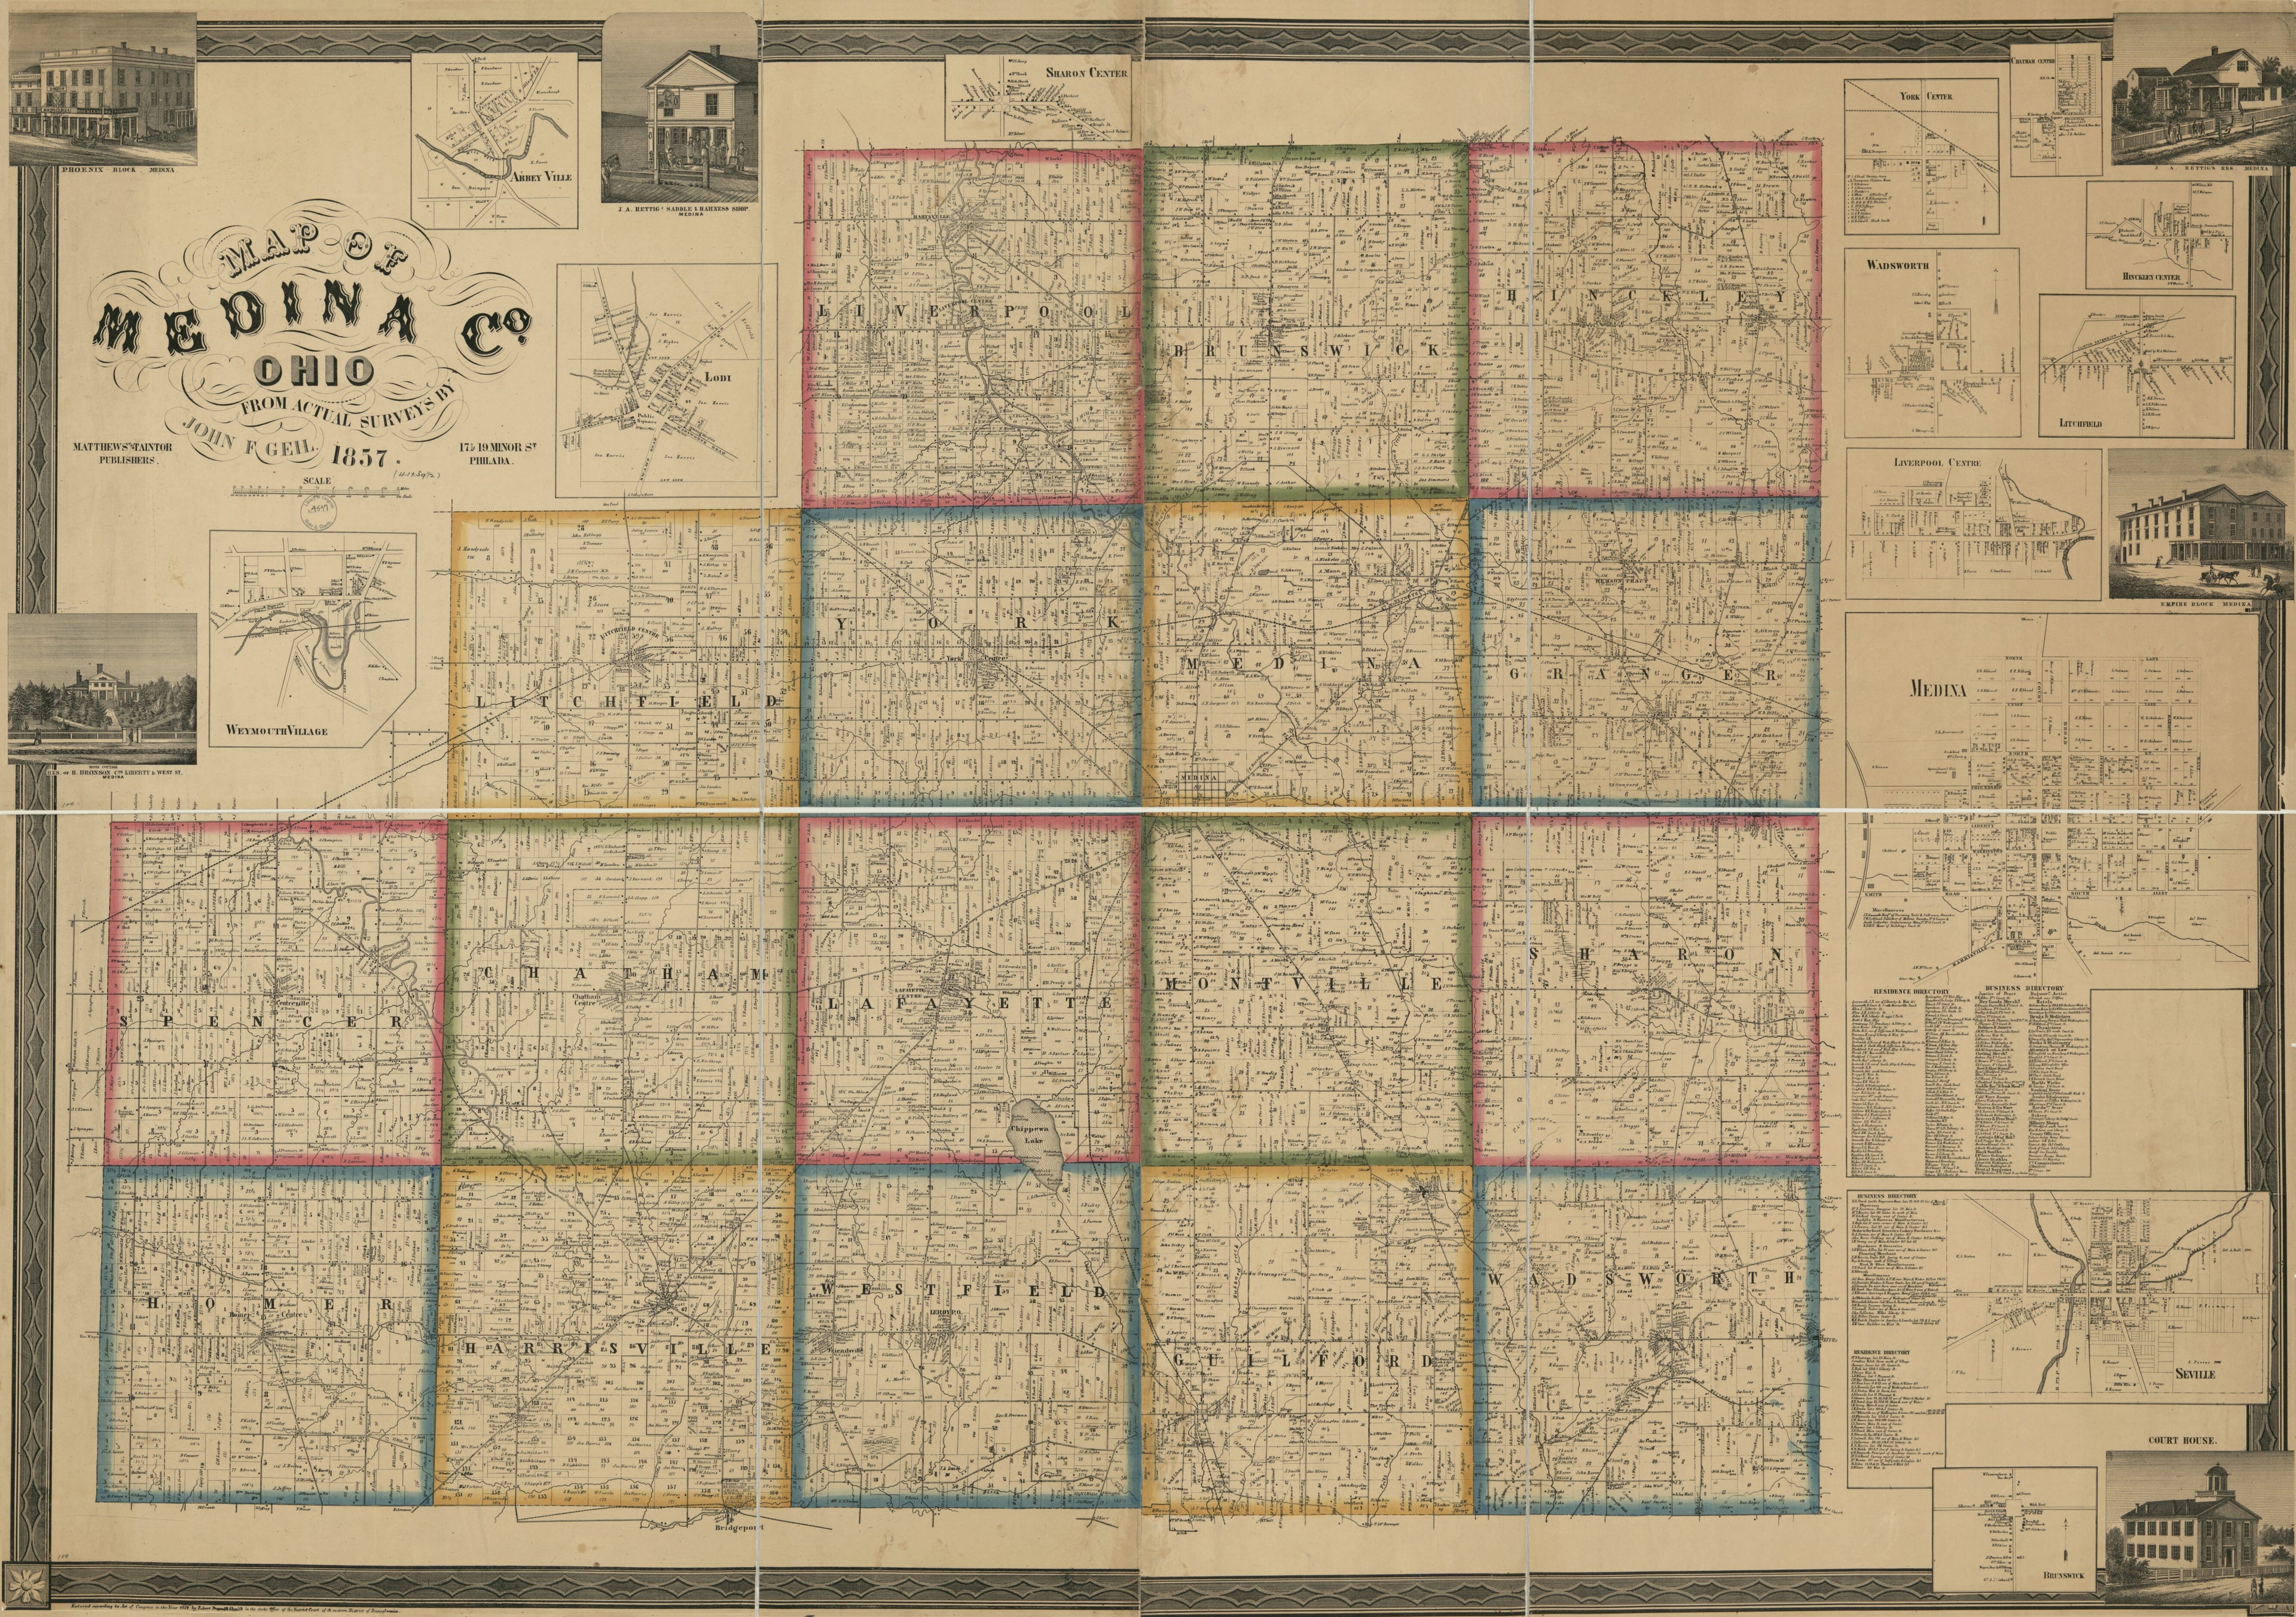 This old map of Map of Medina Co., Ohio from 1857 was created by John F. Geil in 1857